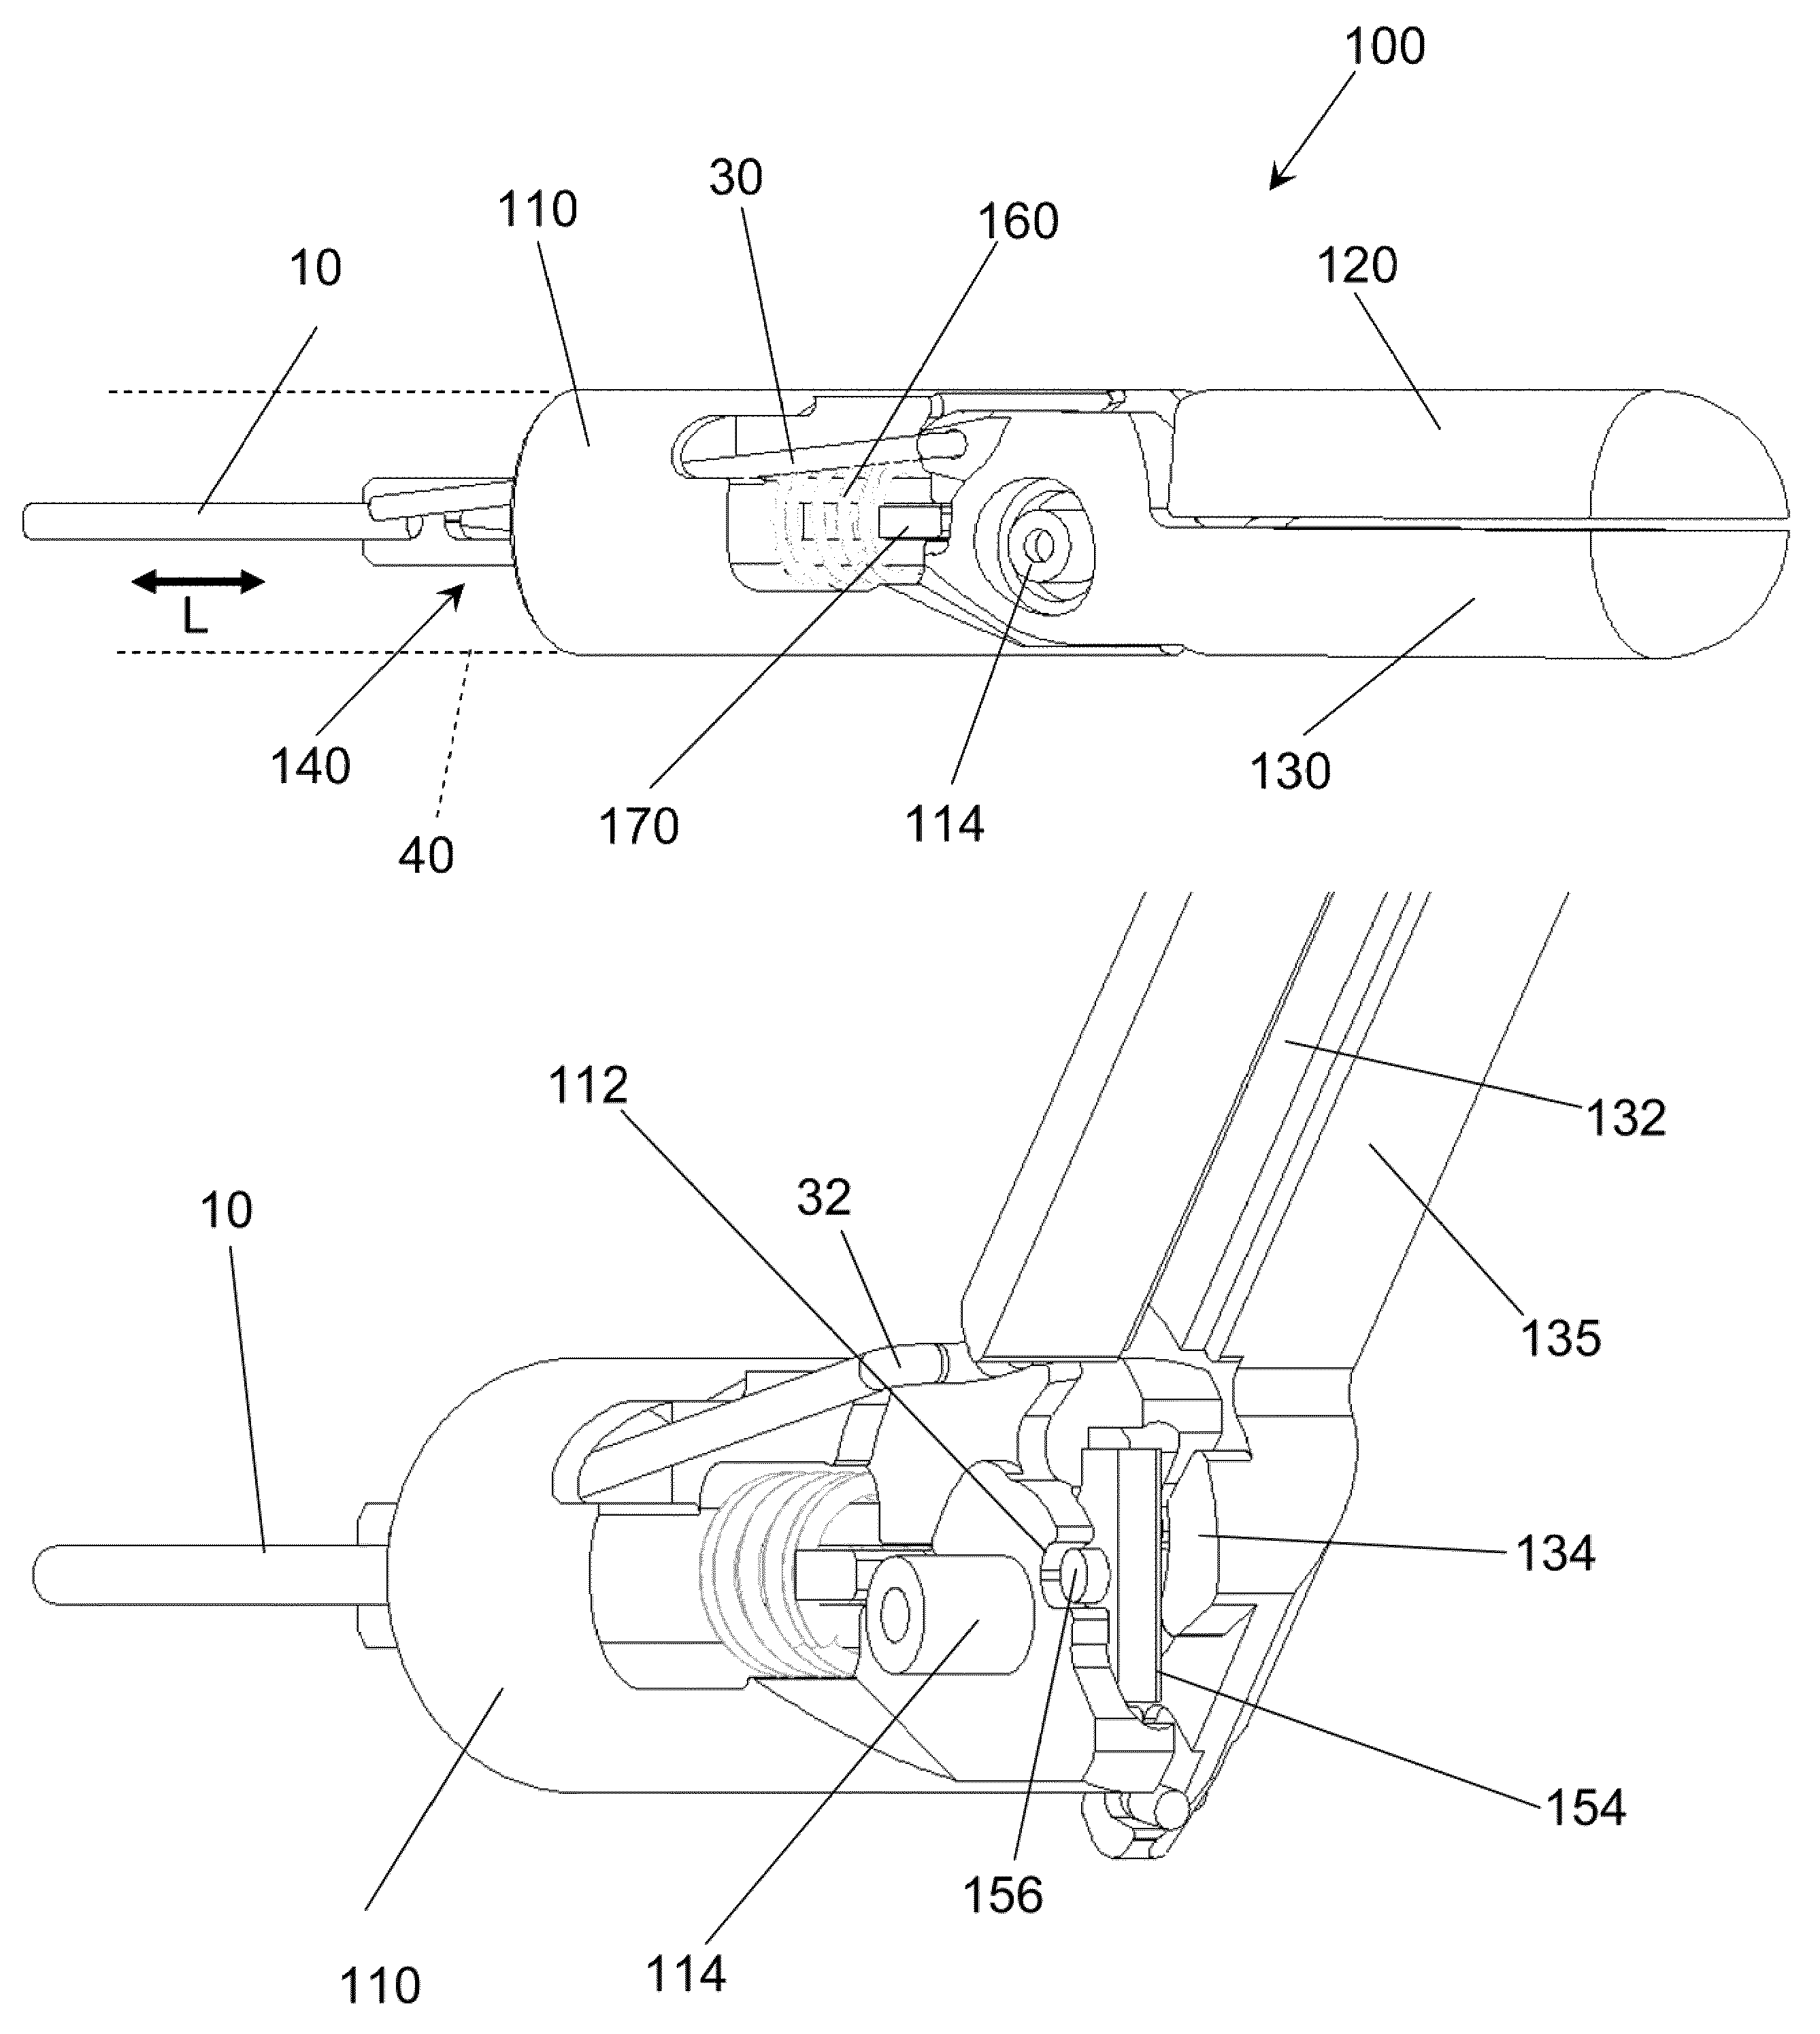 Cordless medical cauterization and cutting device